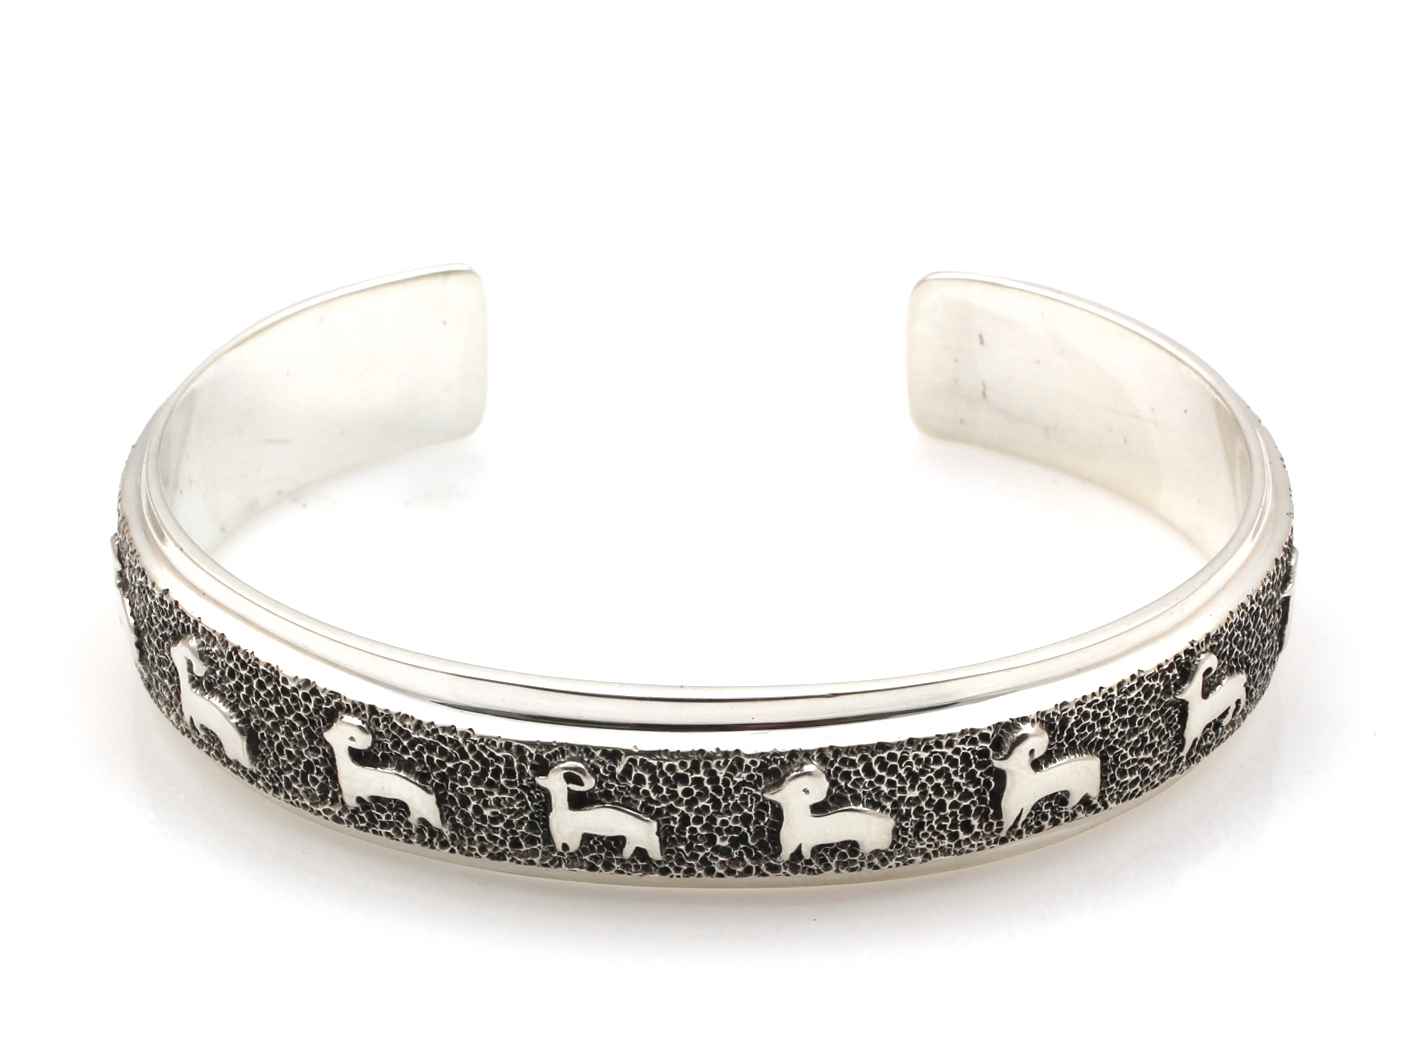 Buy Ram Bracelet With Byzantine Inlays, in Sterling Silver 925 Online in  India - Etsy